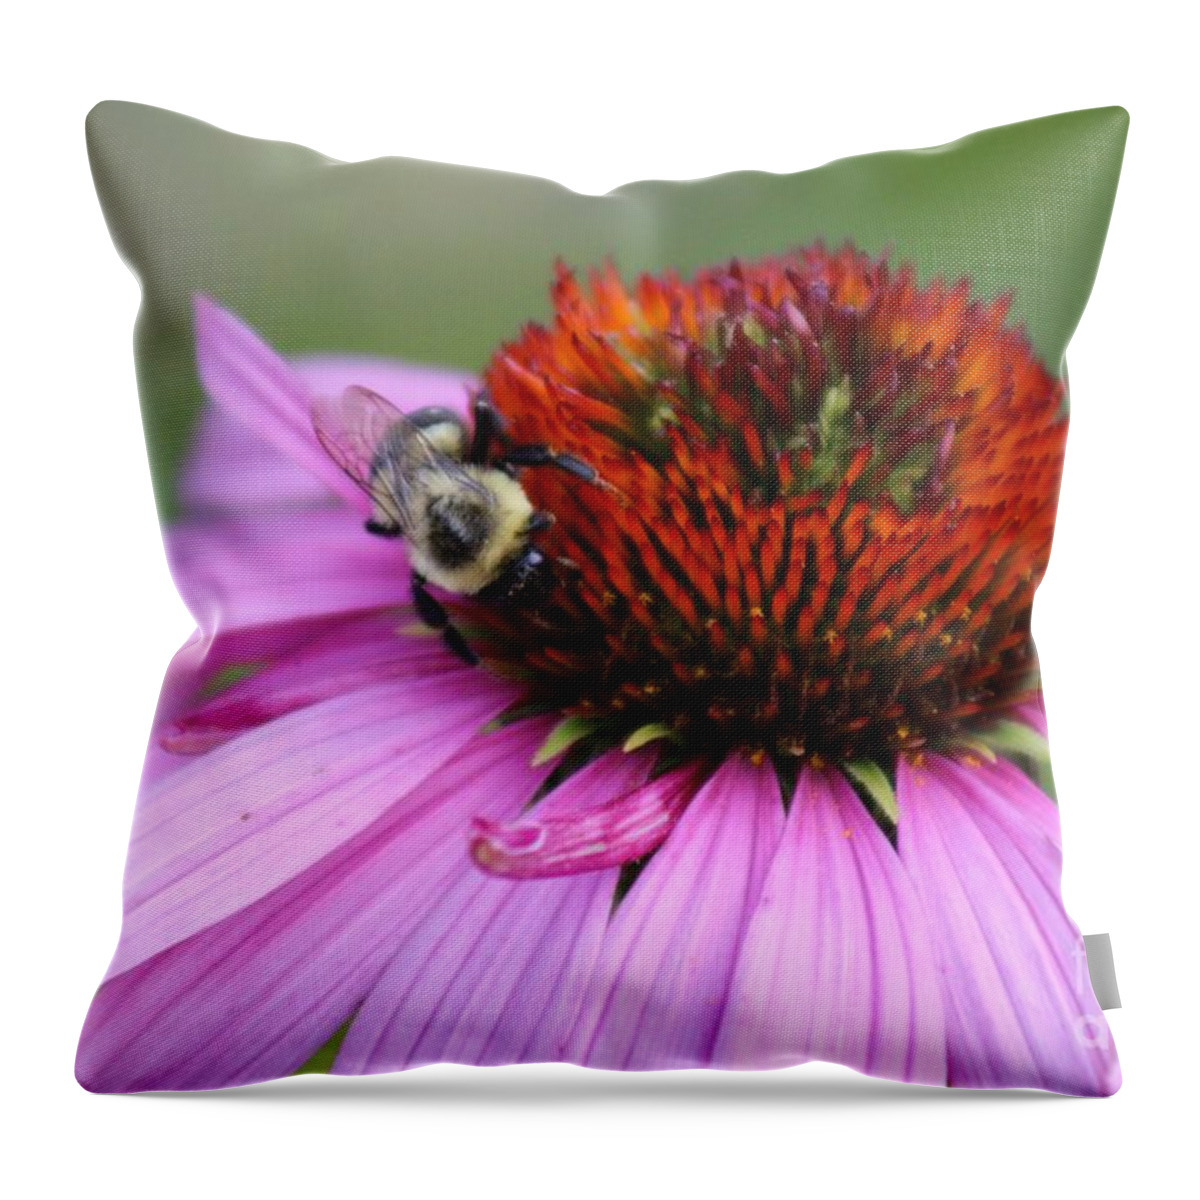 Pink Throw Pillow featuring the photograph Nature's Beauty 85 by Deena Withycombe